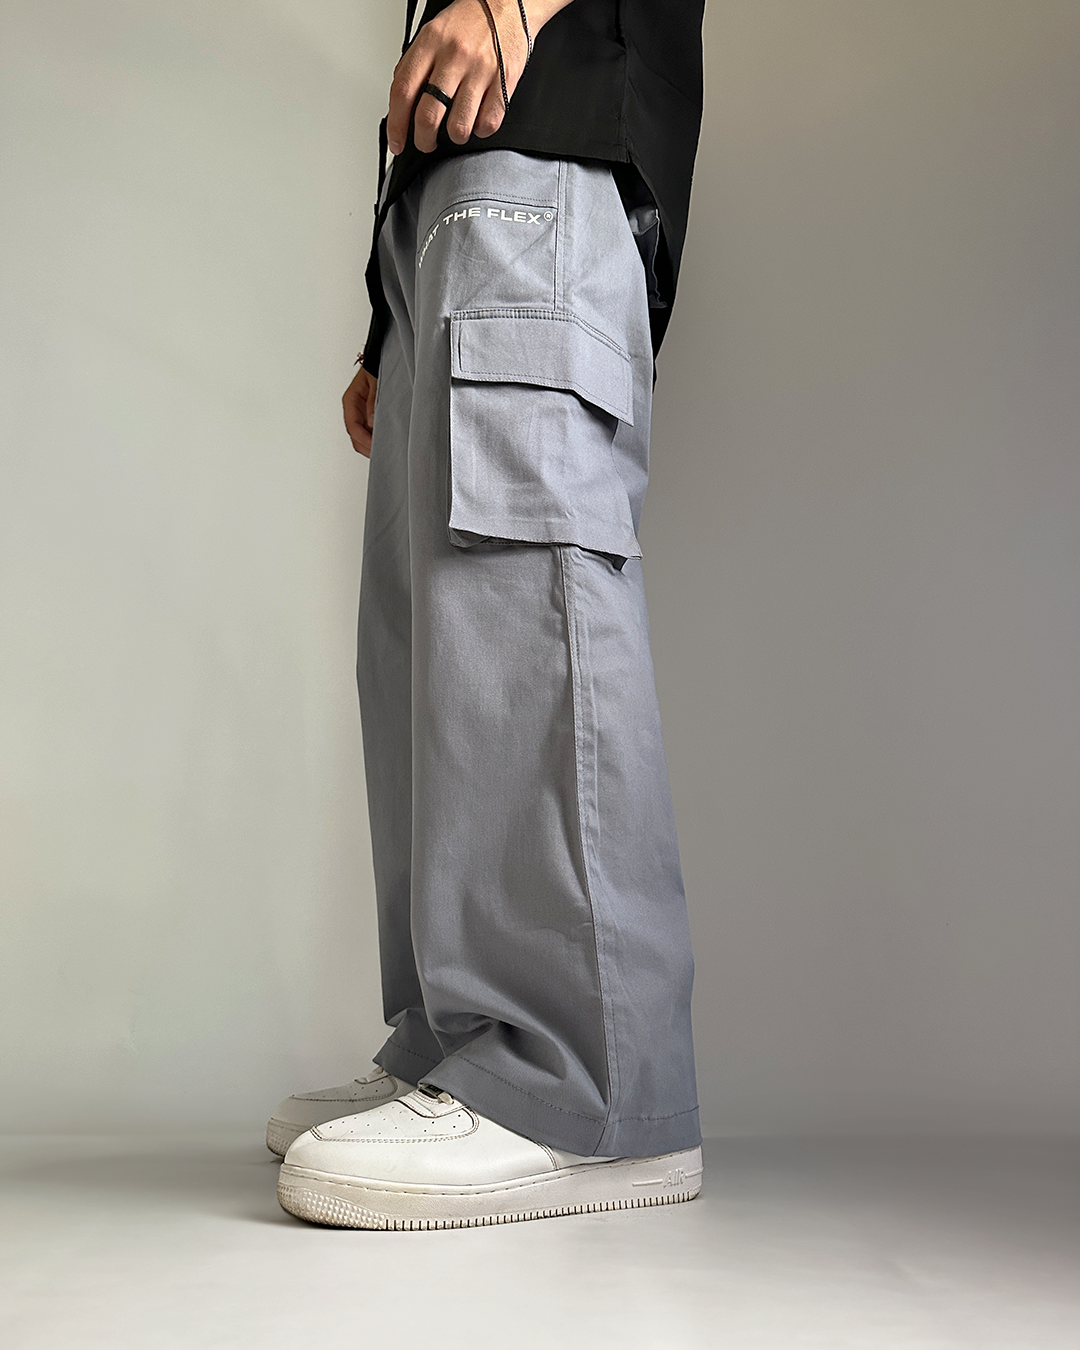 Grey Cargo Pants with Grey Pants Casual Outfits In Their Teens (5 ideas &  outfits)